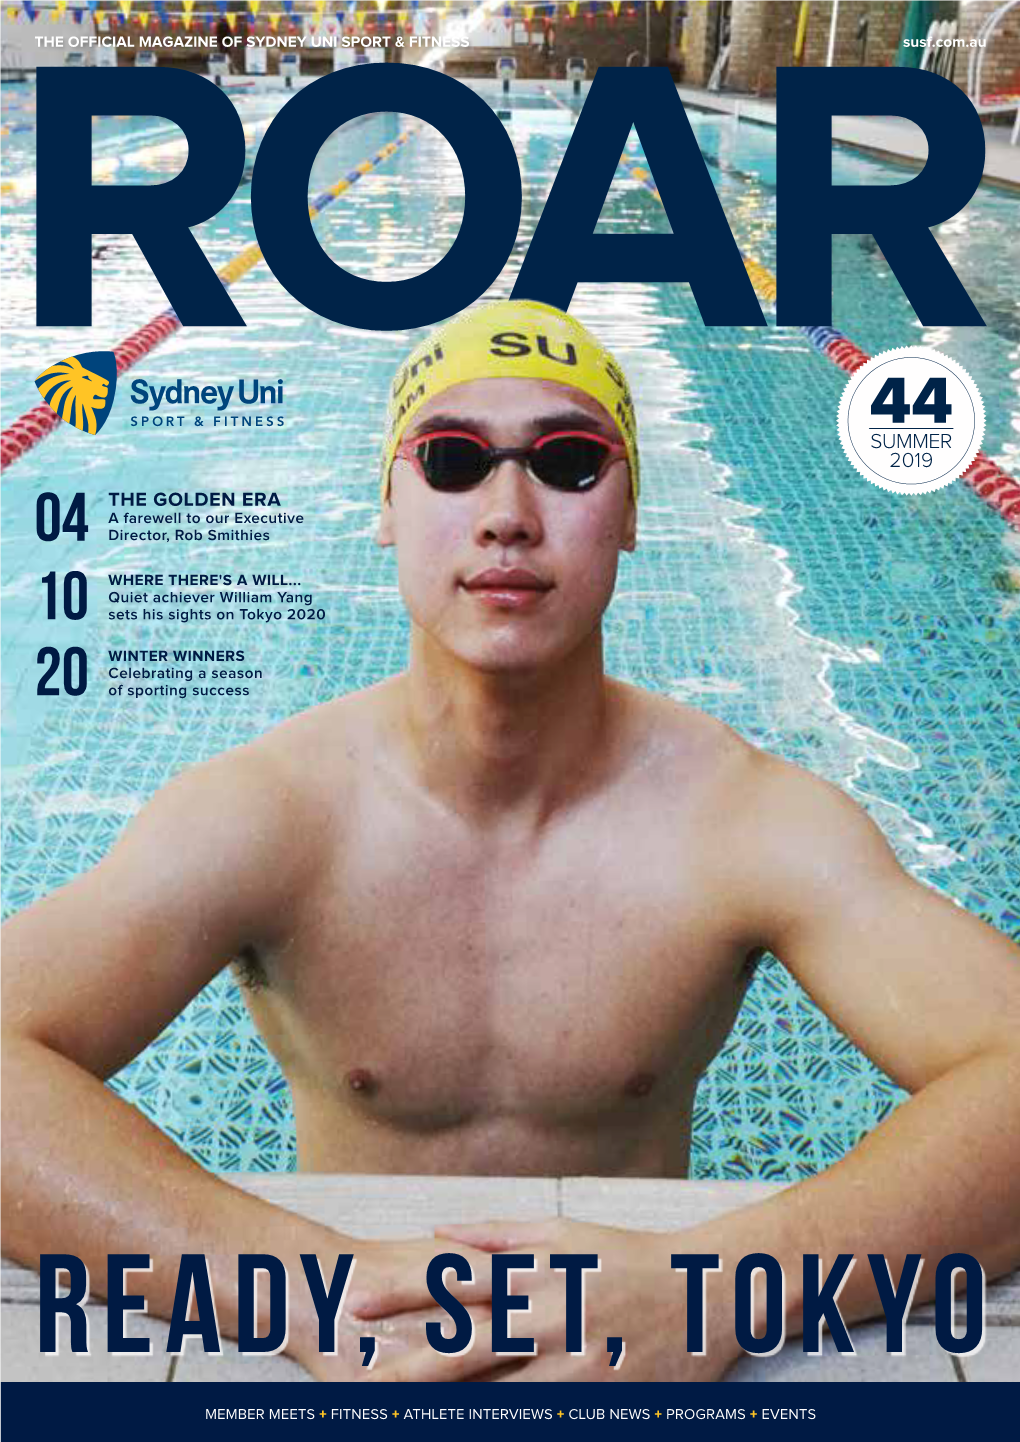 ROARTHE OFFICIAL MAGAZINE of SYDNEY UNI SPORT & FITNESS Susf.Com.Au 44 SUMMER 2019 the GOLDEN ERA a Farewell to Our Executive 04 Director, Rob Smithies